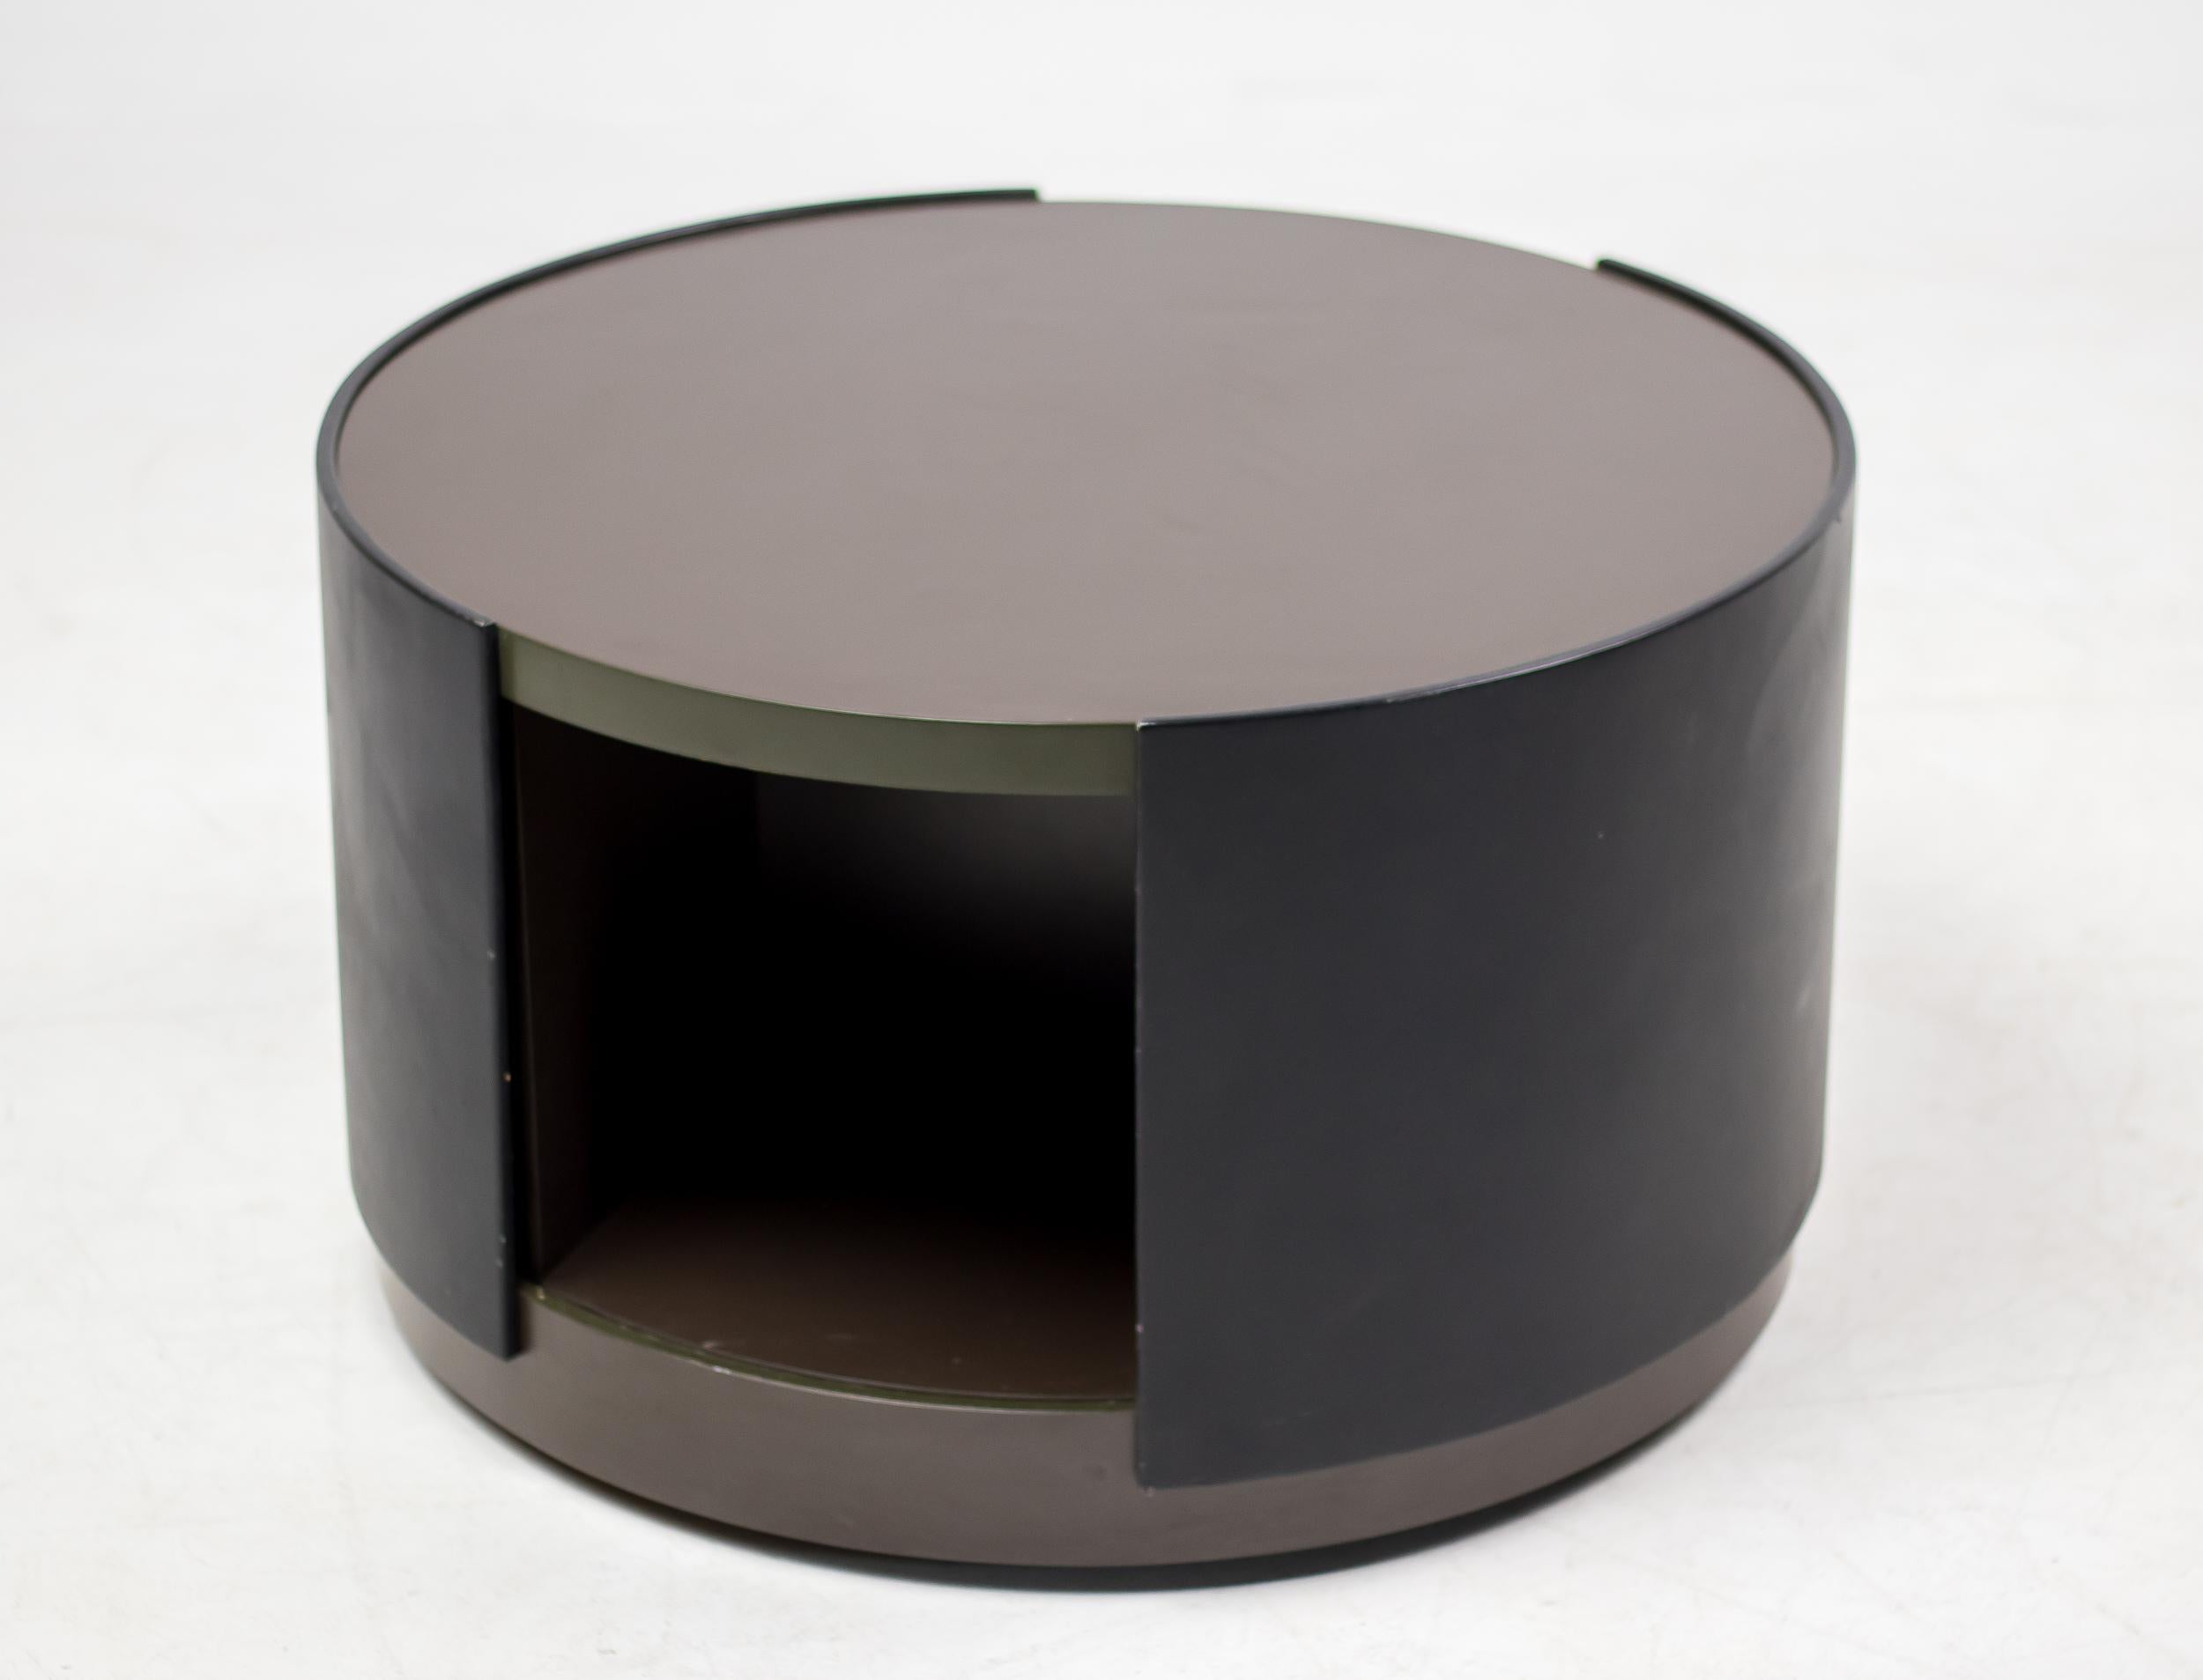 This rare round cabinet on hidden wheels designed by Osvaldo Borsani for Tecno is made out of lacquered plywood, laminate, leather and steel. The dark grey lacquered plywood interior revolves inside the black leather clad exterior. Manufacturer's